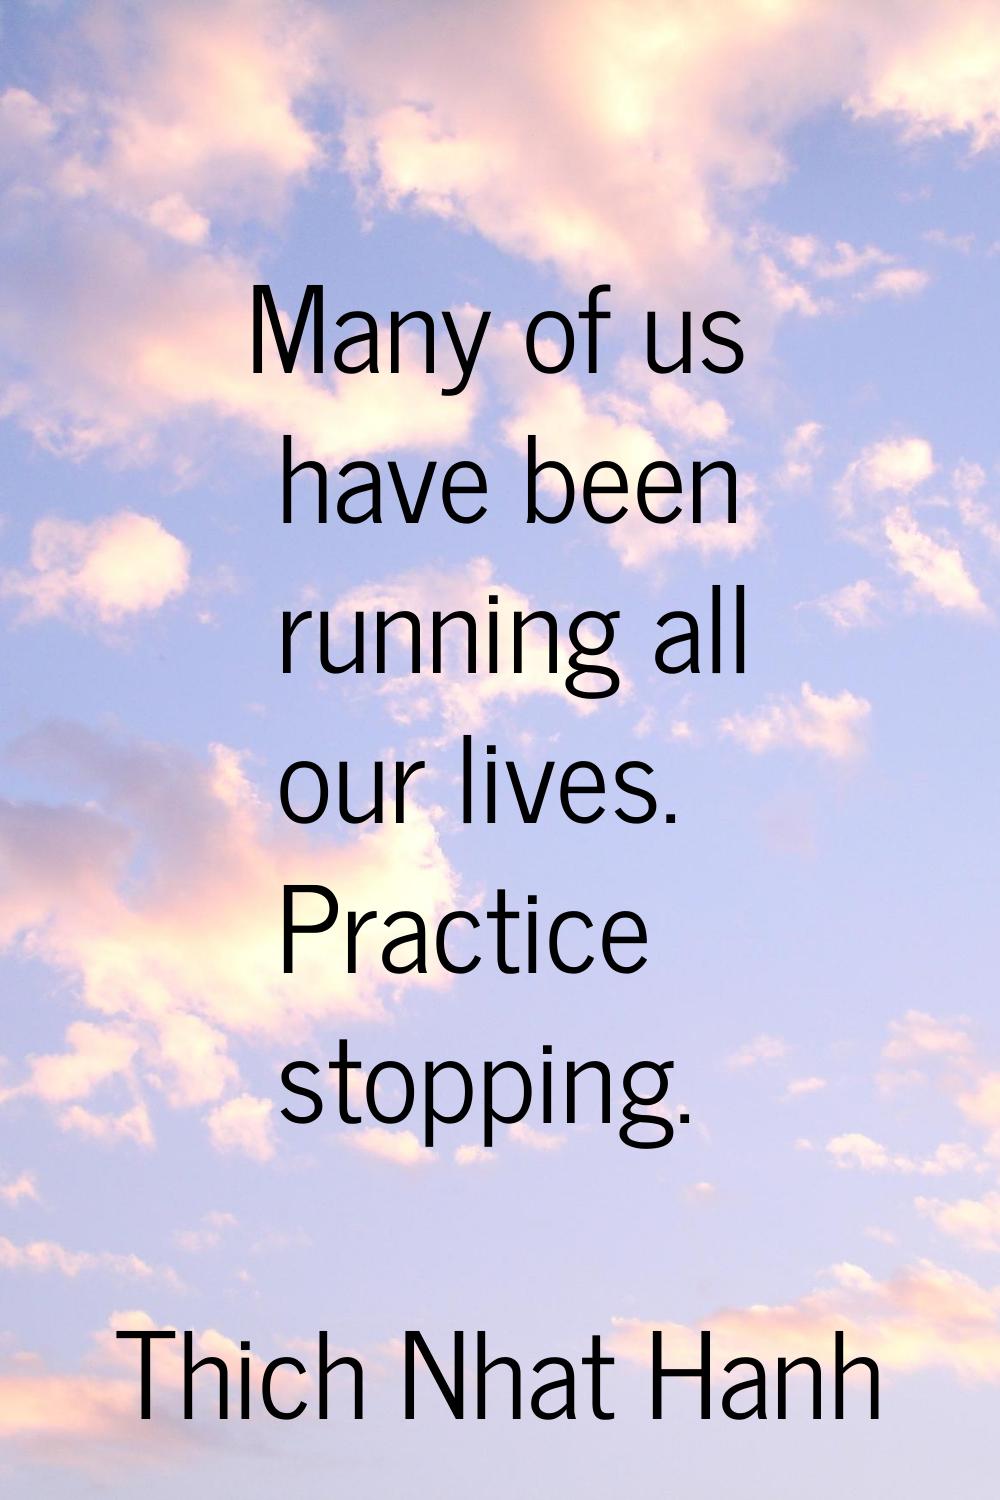 Many of us have been running all our lives. Practice stopping.